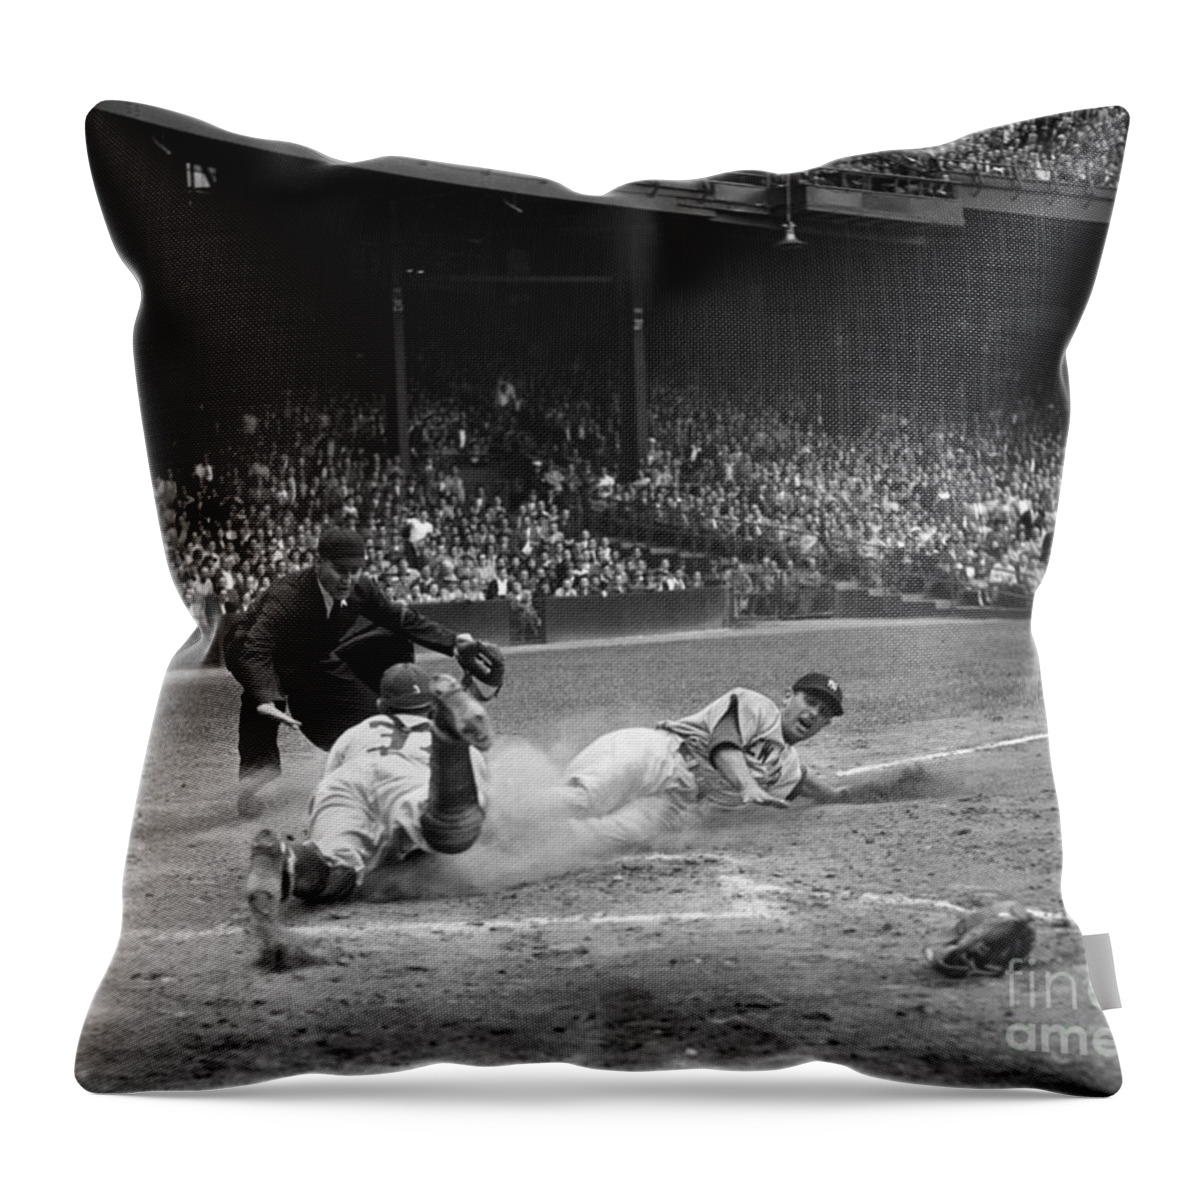 1950s Throw Pillow featuring the photograph Pro Baseball Game, C.1950s by H. Armstrong Roberts/ClassicStock